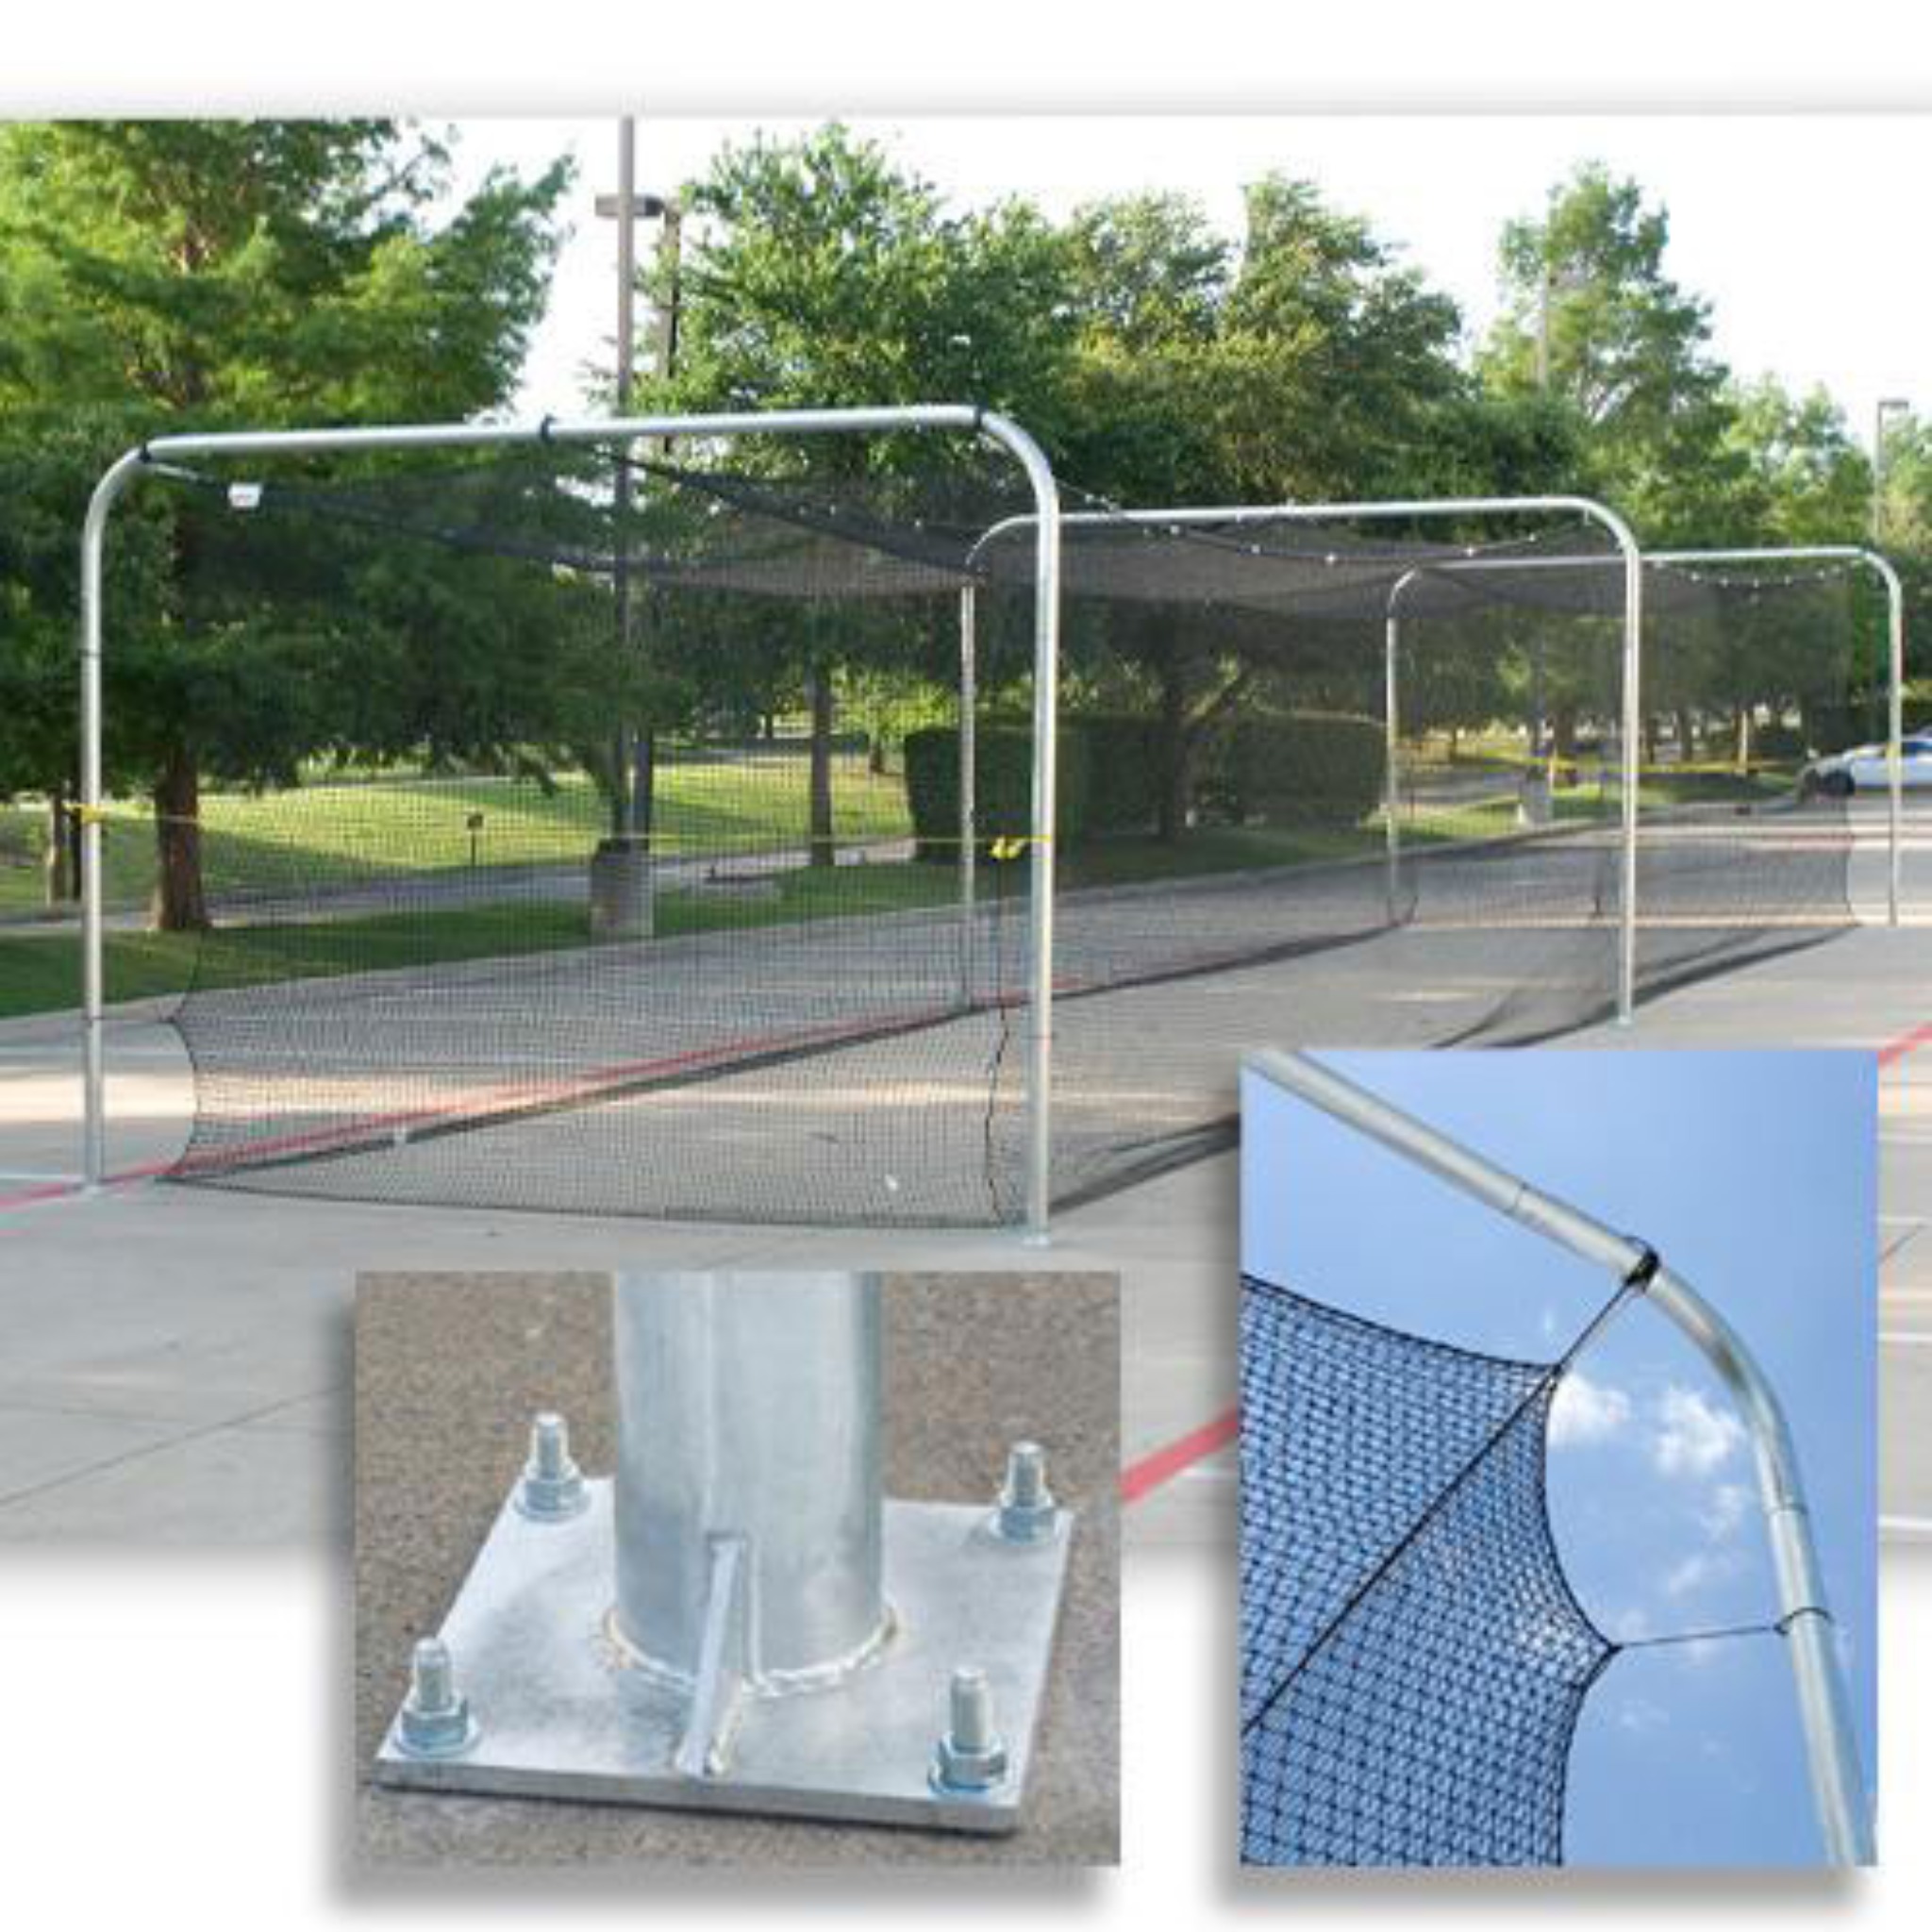 Batting Tunnel Frames are Heavy-Duty Galvanized Steel Pipes and Come in 3-Section Frames for a 55’ Tunnel and 4-Section Frames for a 70’ Tunnel.